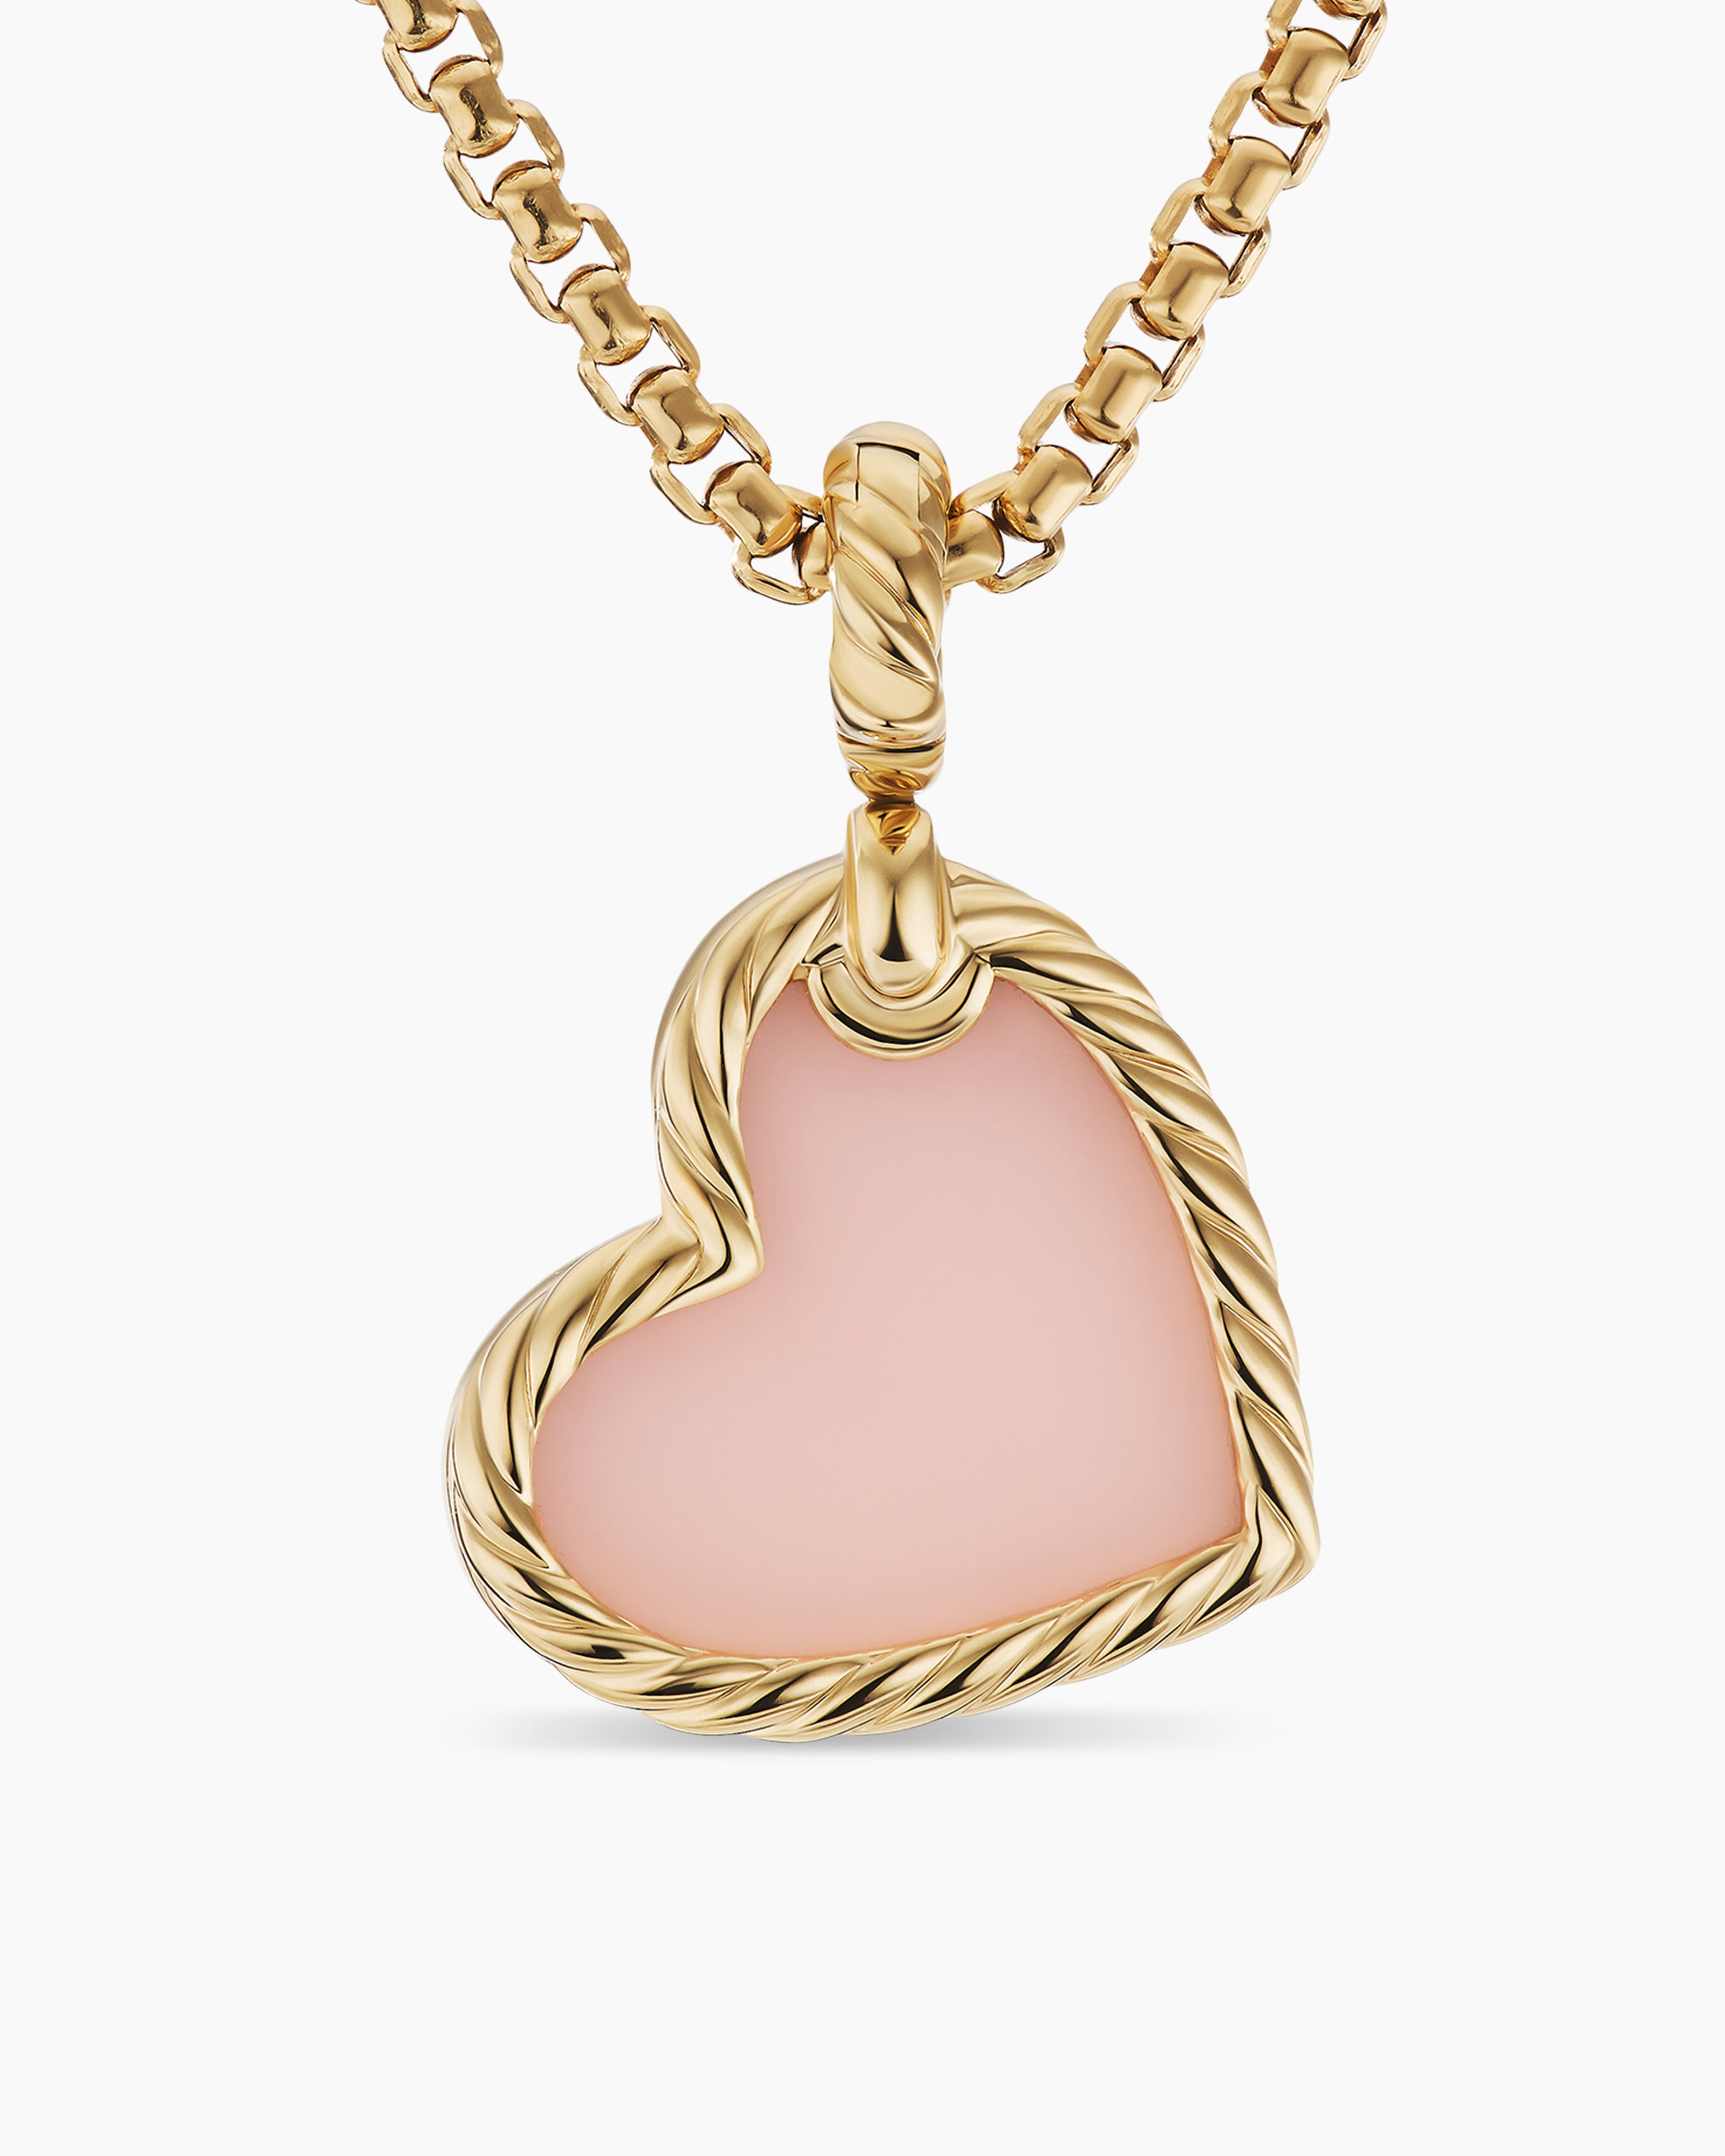 DY Elements® Heart Amulet in 18K Yellow Gold with Pink Opal and Diamonds |  David Yurman